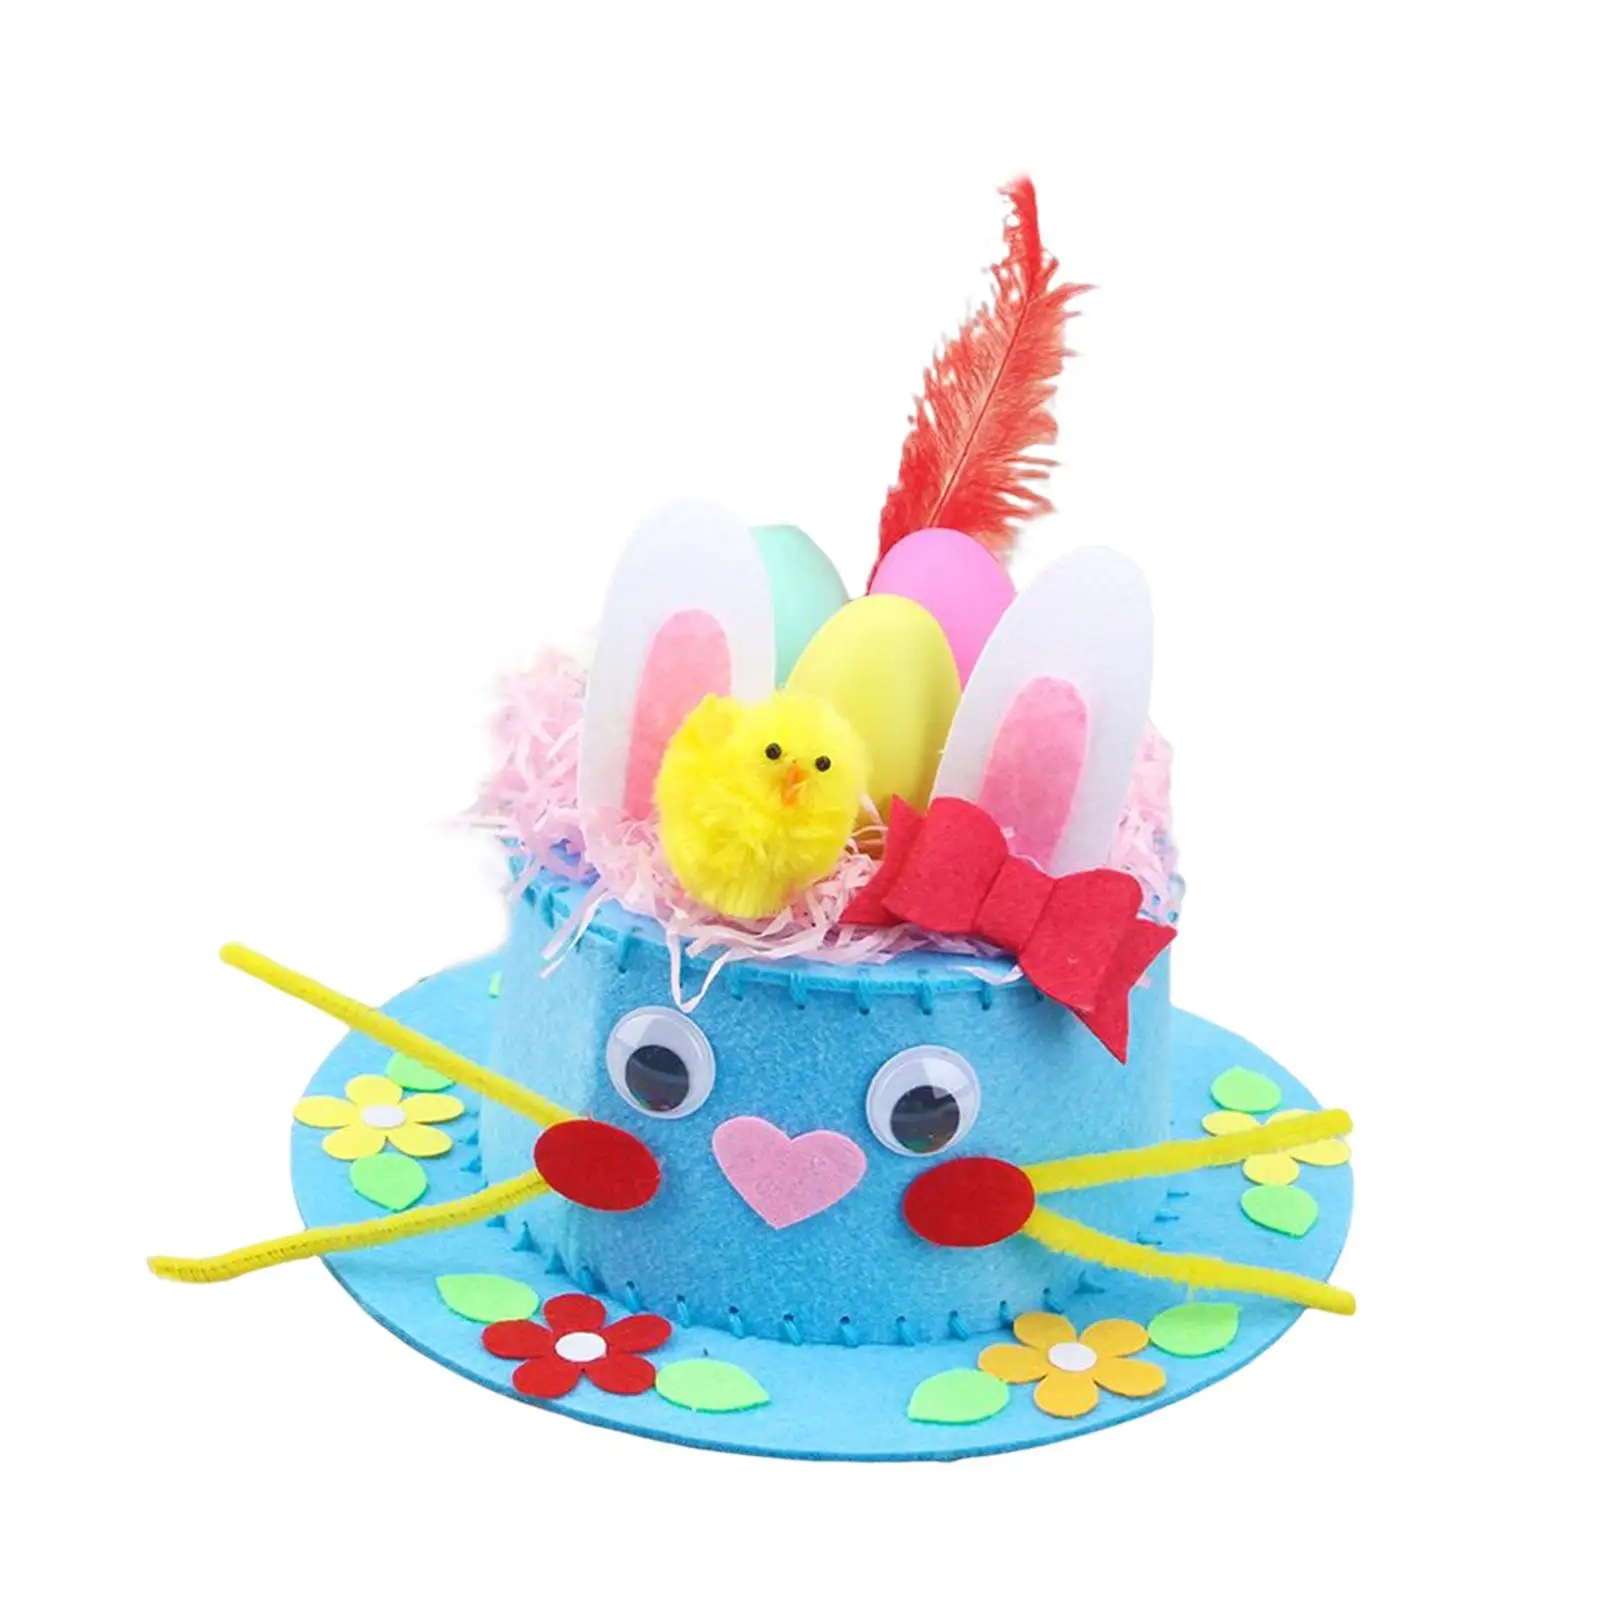 Easter Bonnet Material Handmade Crafts Made of Non Woven Fabric